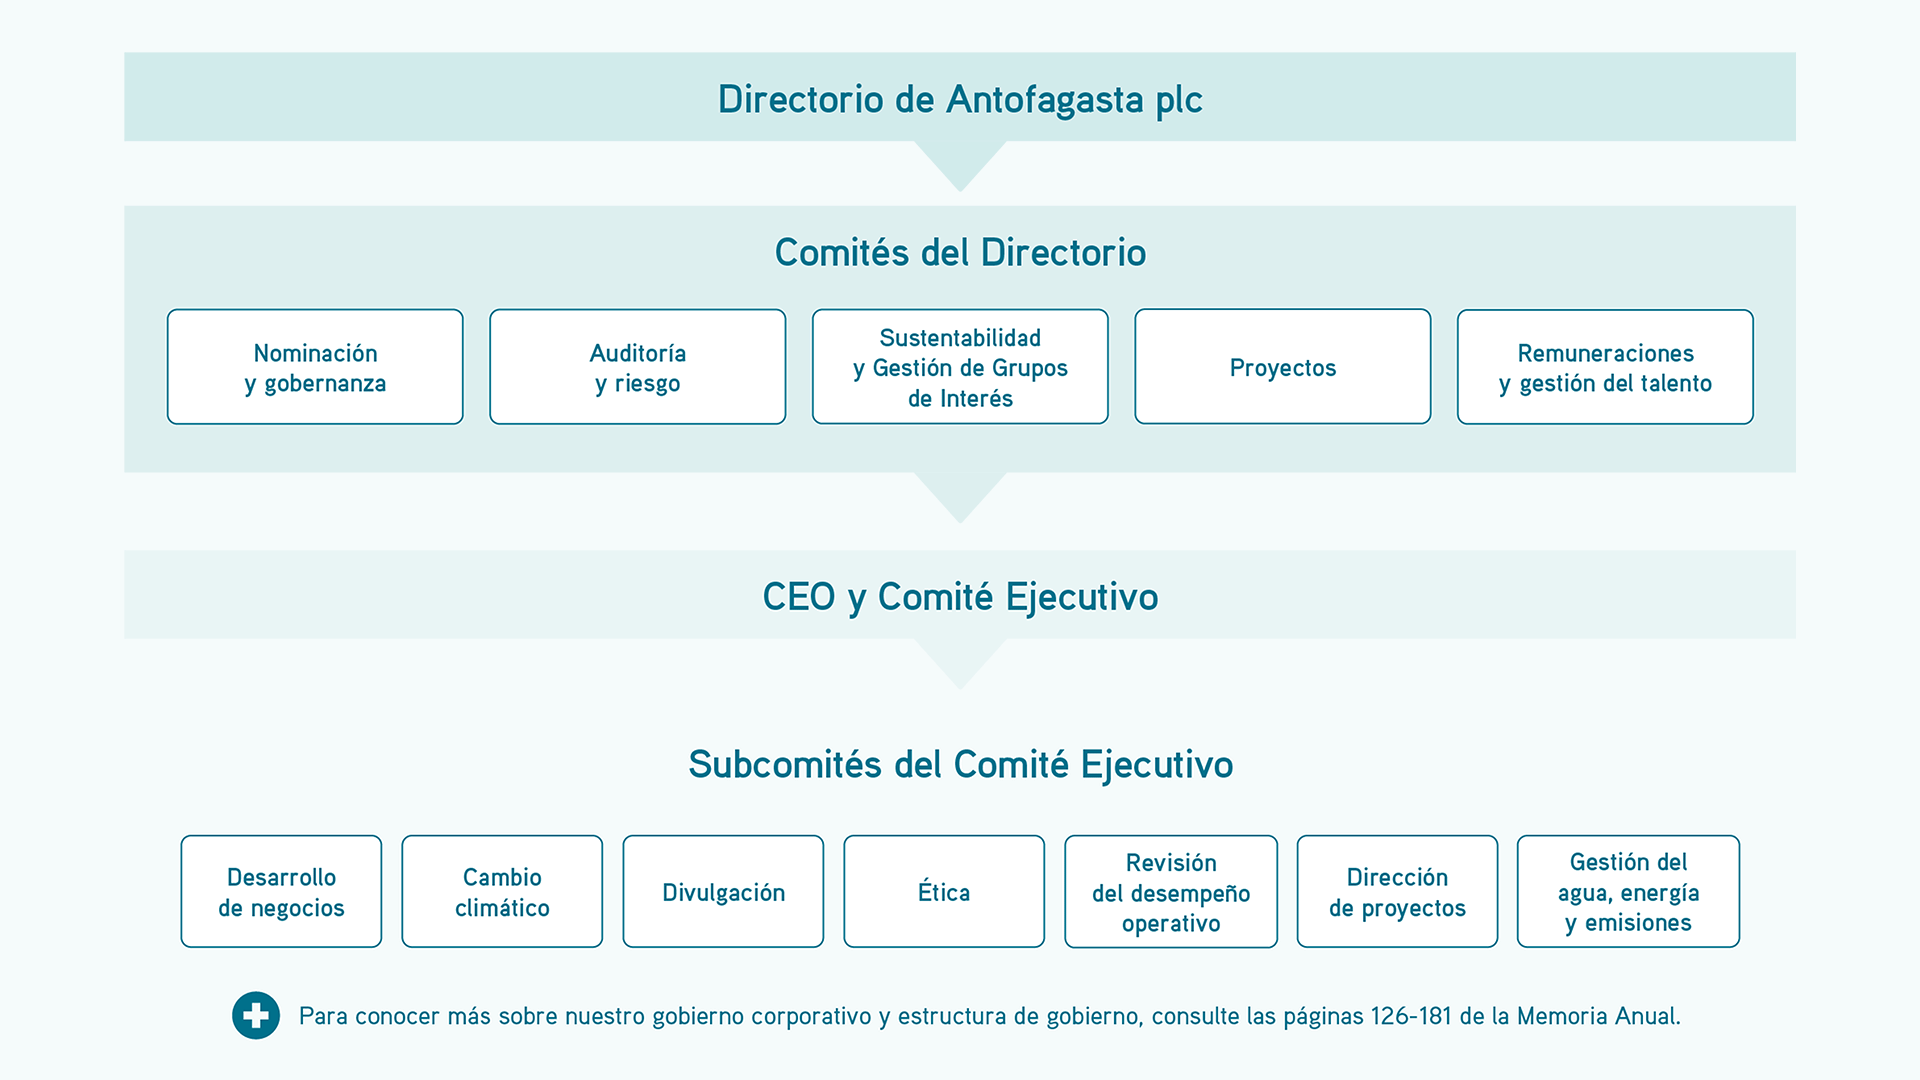 Governance Structure image